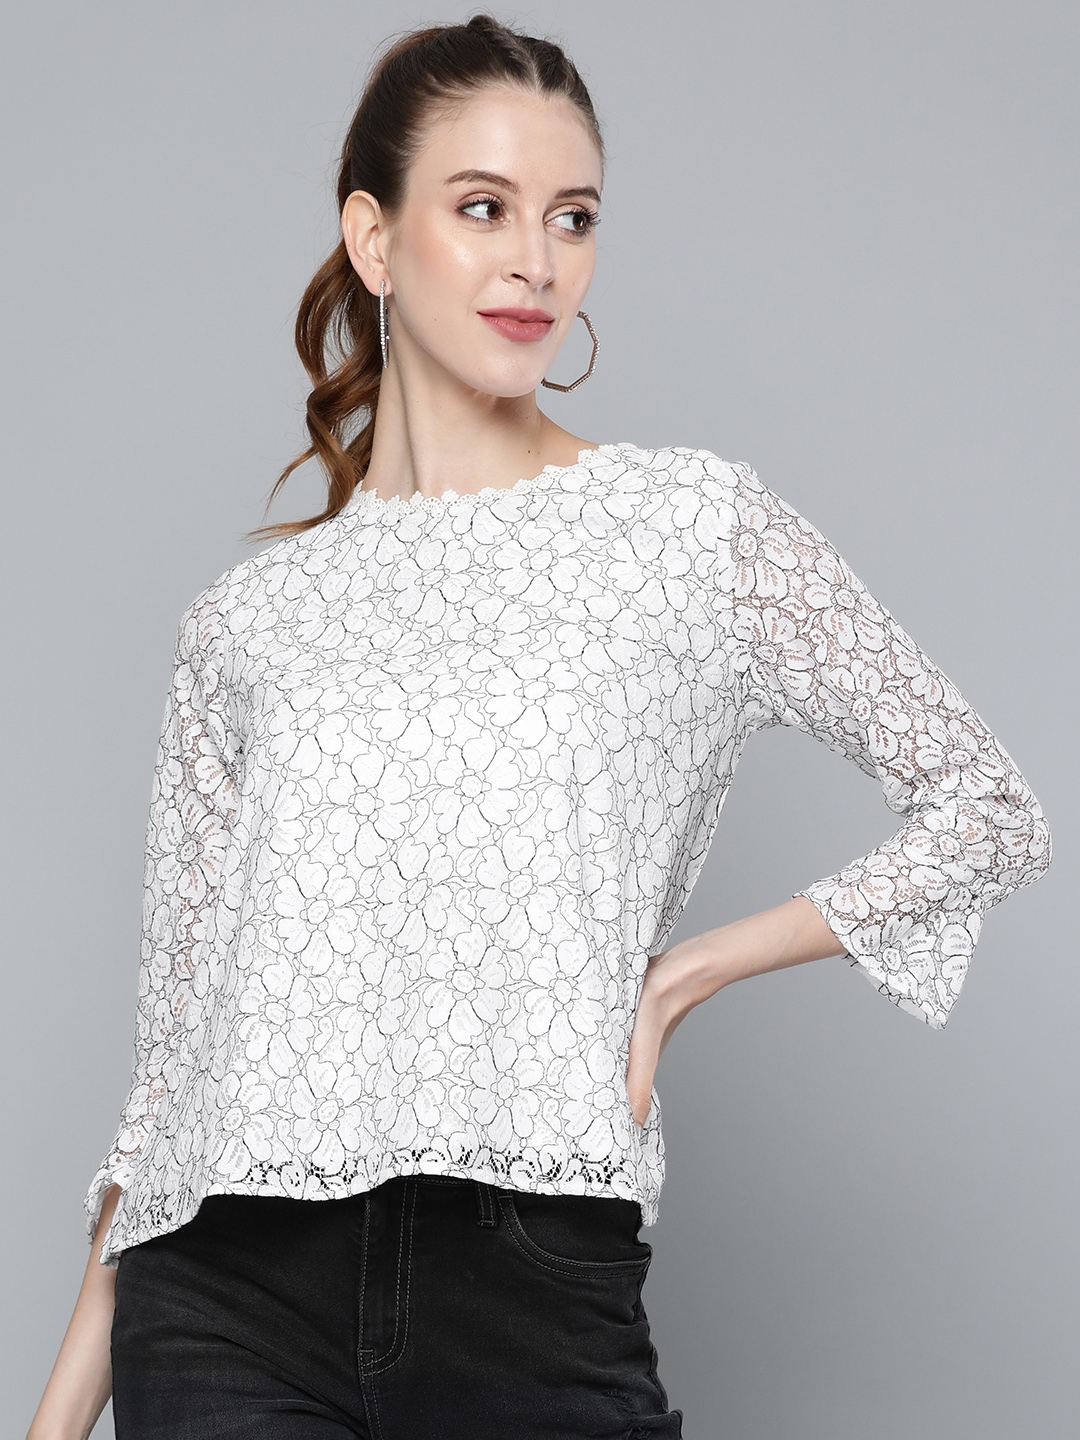 SASSAFRAS White   Black Floral Printed Bell Sleeve Lace Top